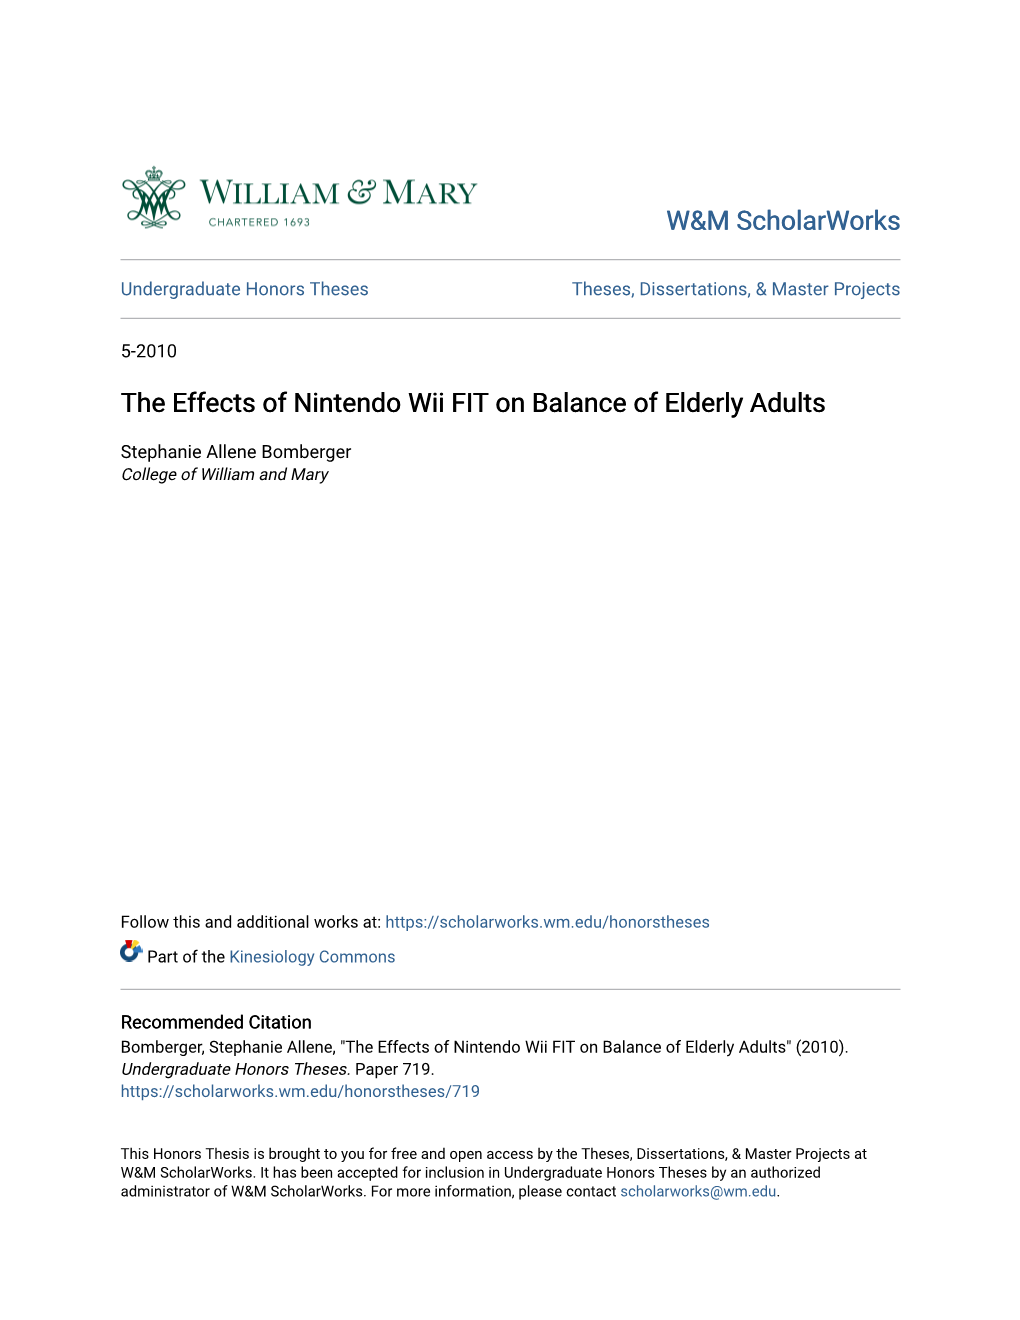 The Effects of Nintendo Wii FIT on Balance of Elderly Adults